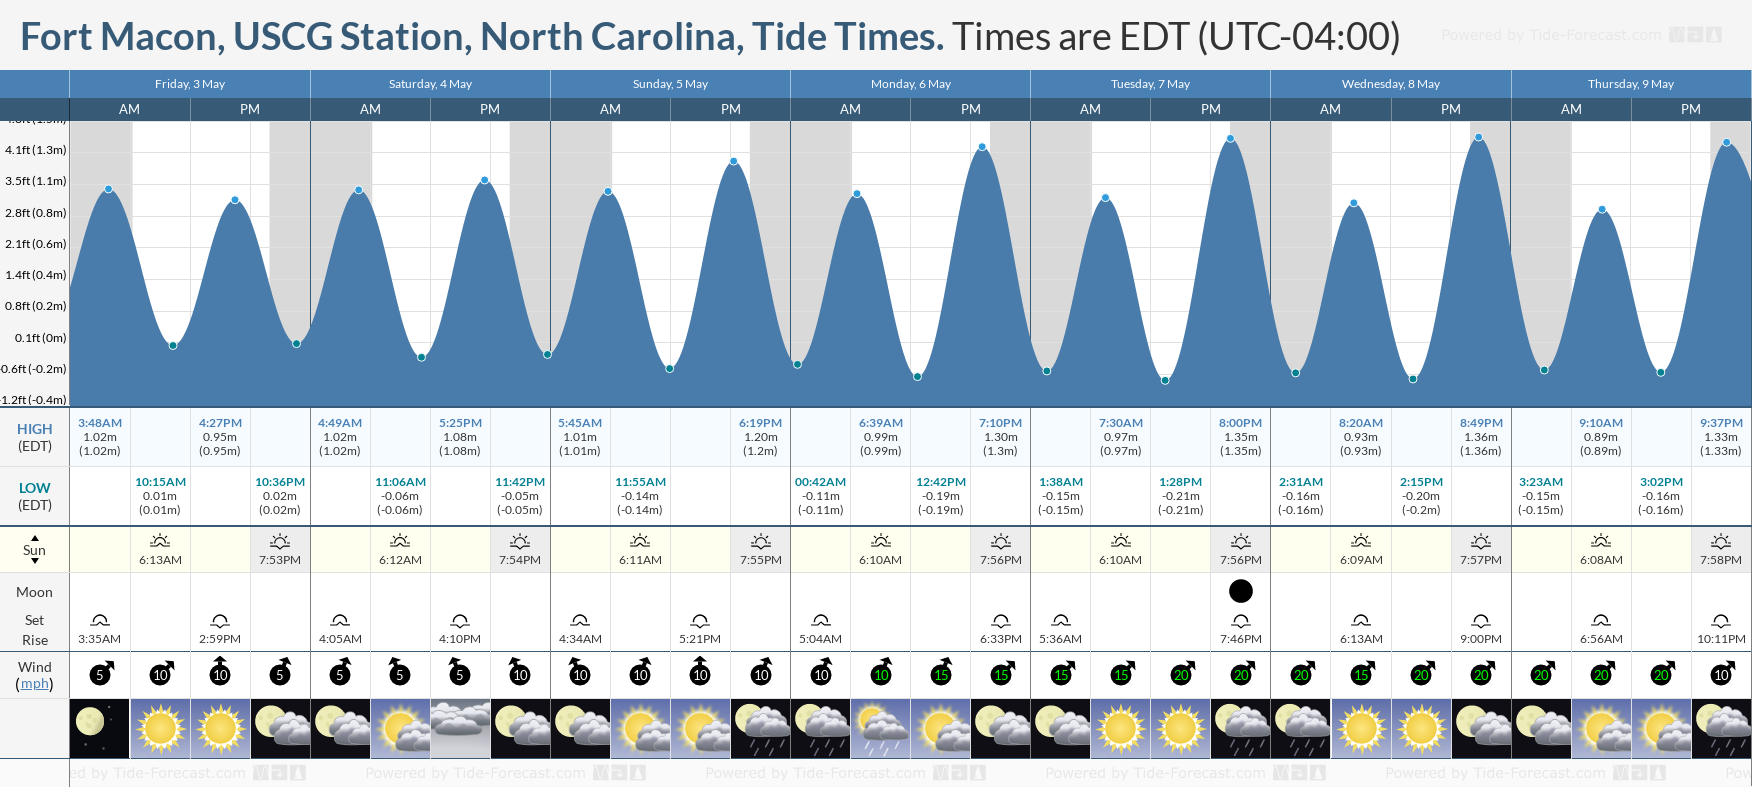 Fort Macon, USCG Station, North Carolina Tide Chart including high and low tide times for the next 7 days